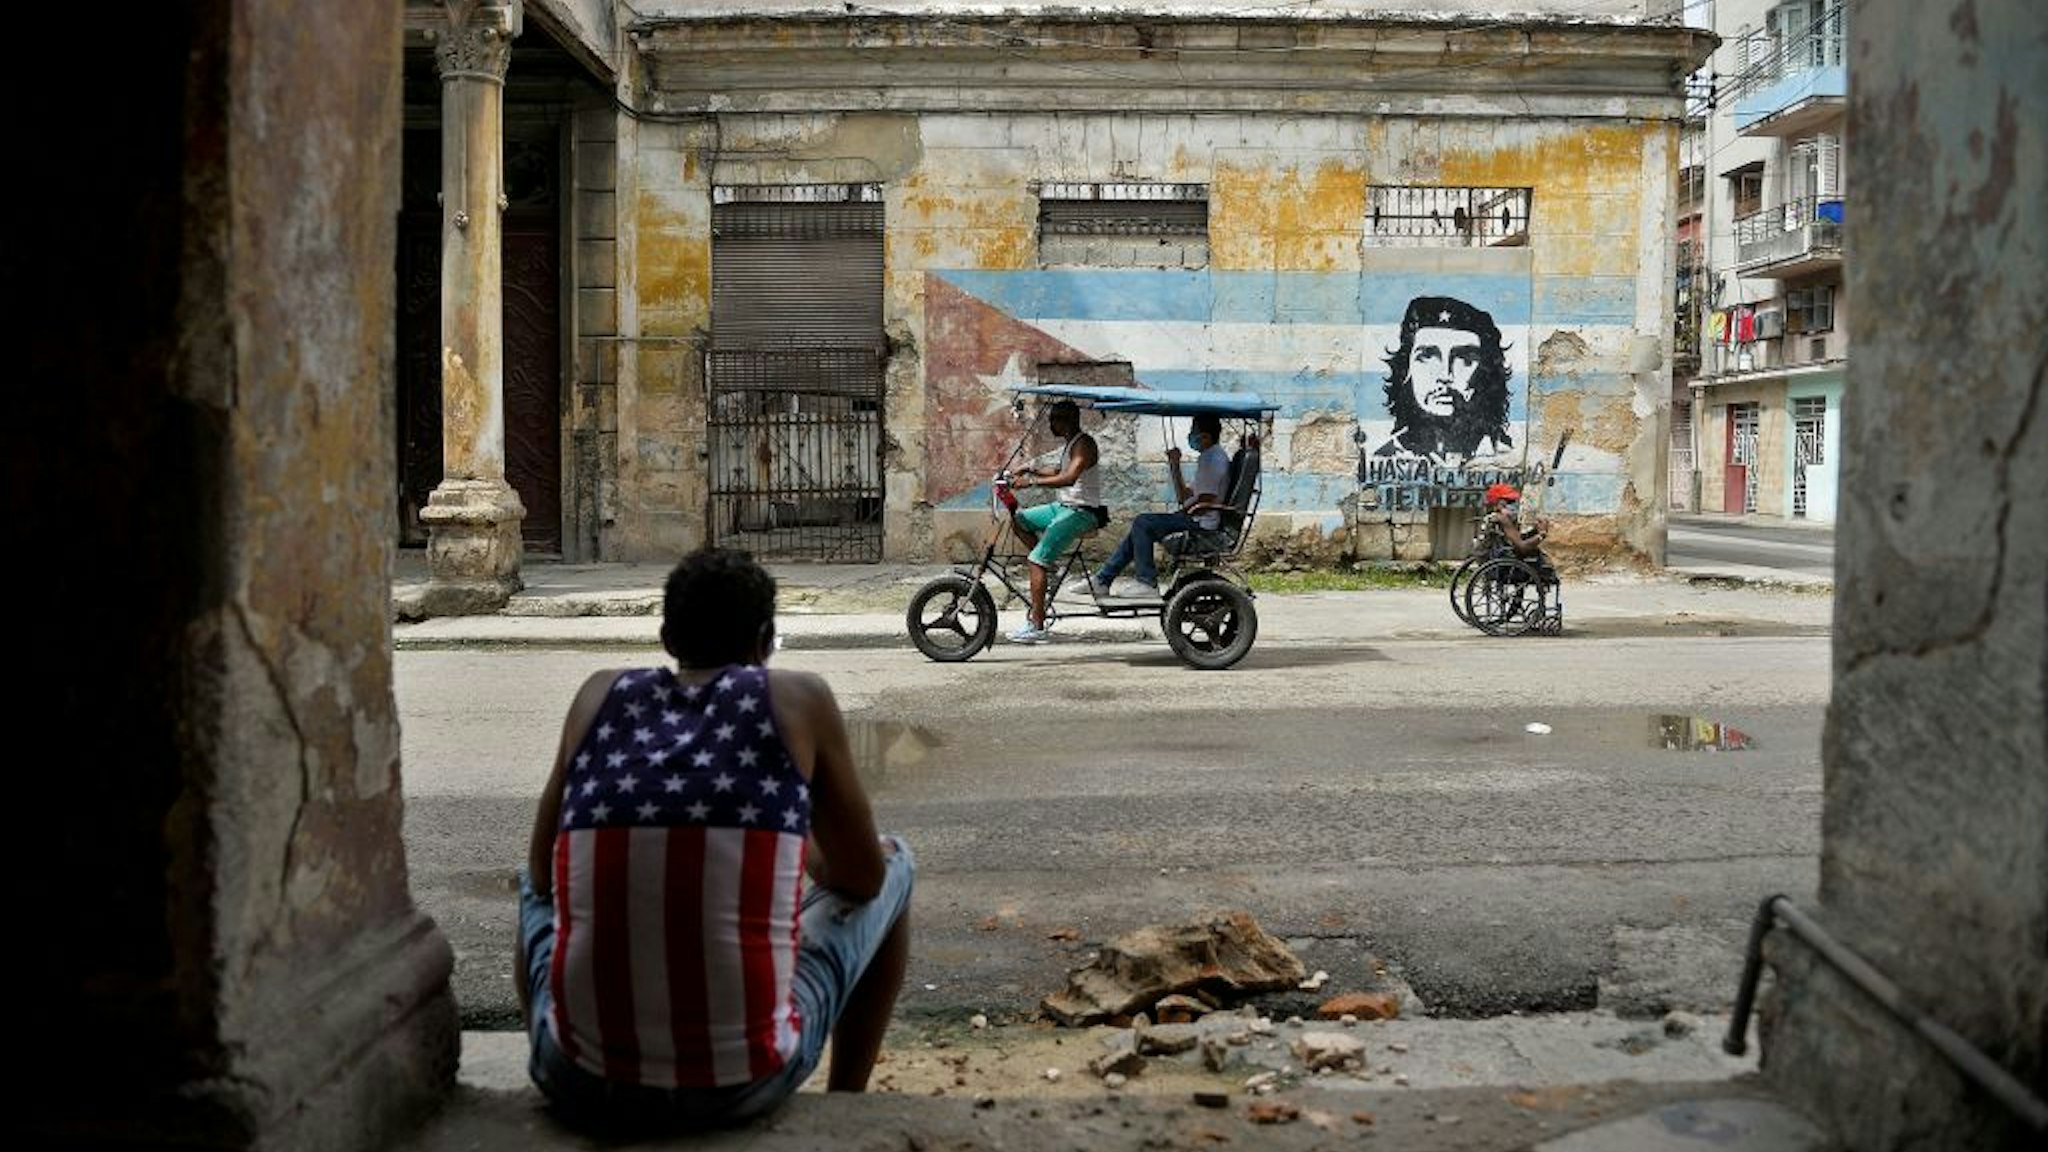 Man wearing a tank top with a design of the US flag rests in Havana on October 21, 2020, amid the COVID-19 novel coronavirus pandemic.